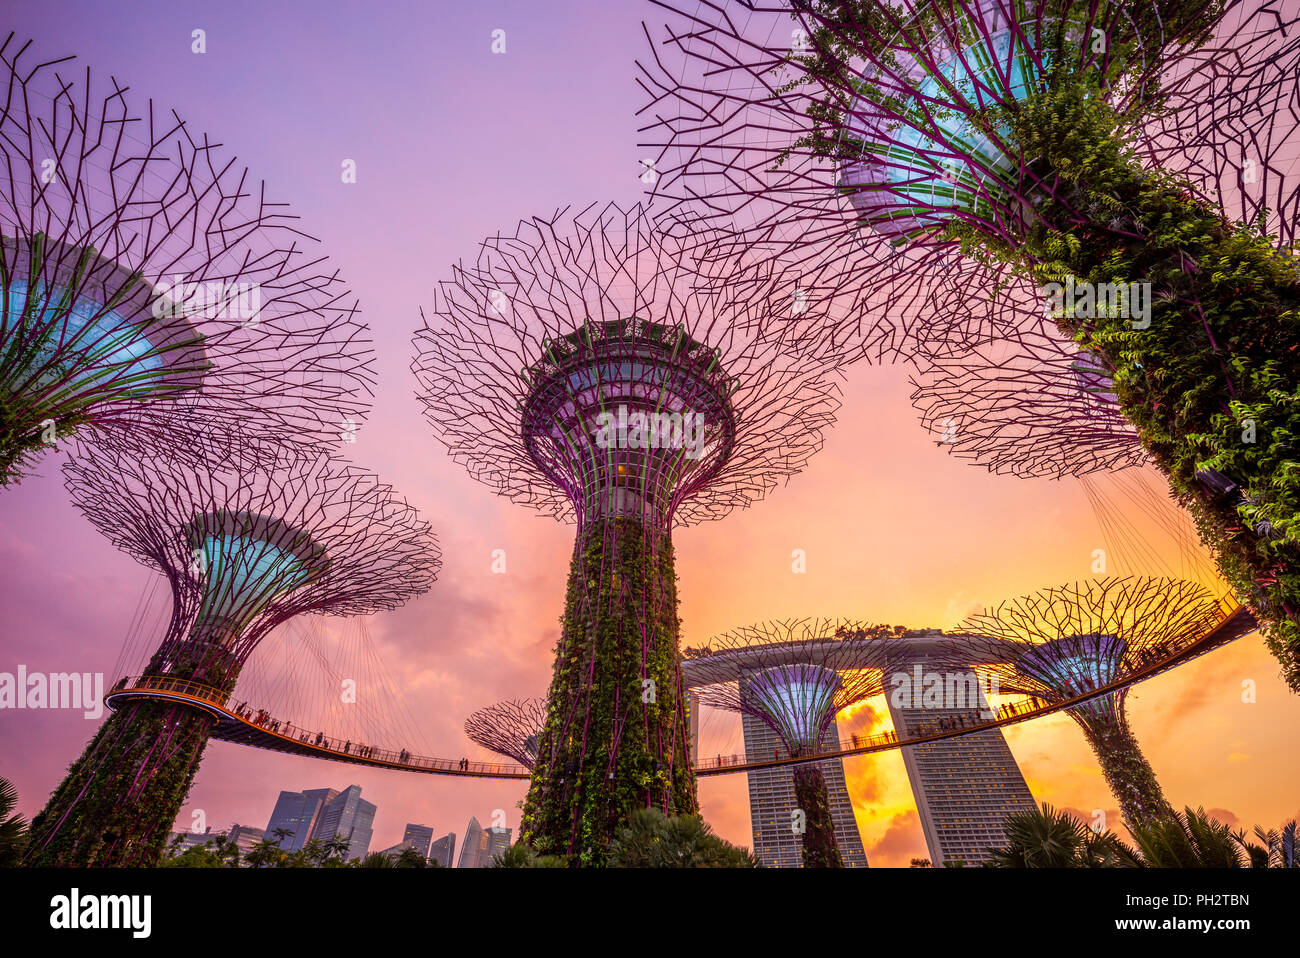 Gardens by the Bay with supertree in singapore Stock Photo